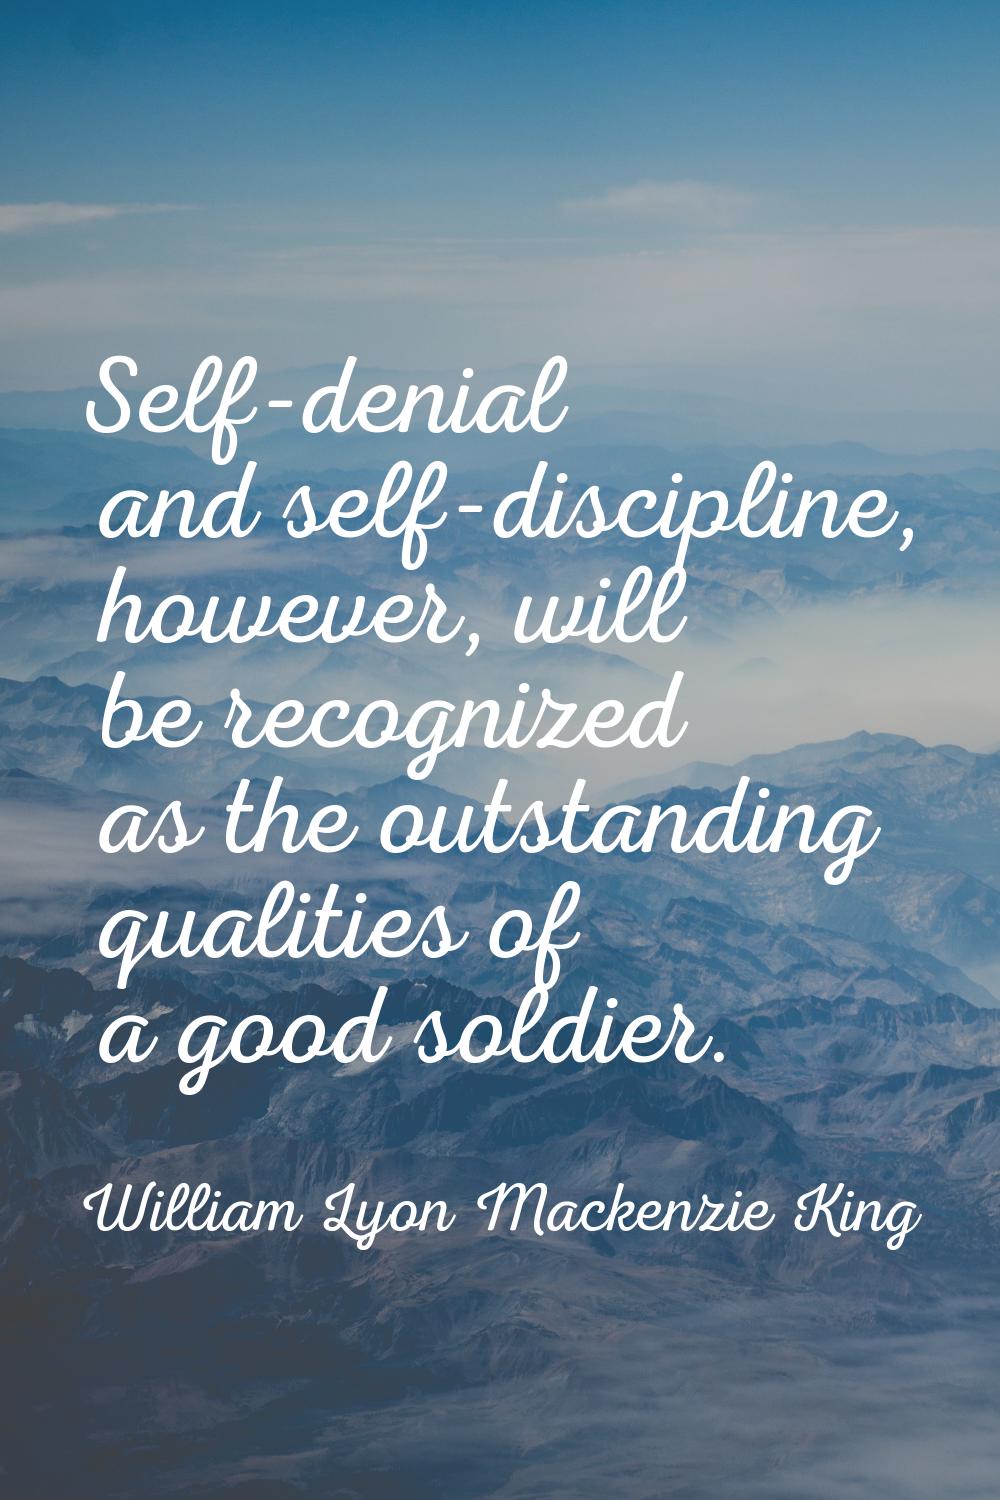 Self-denial and self-discipline, however, will be recognized as the outstanding qualities of a good